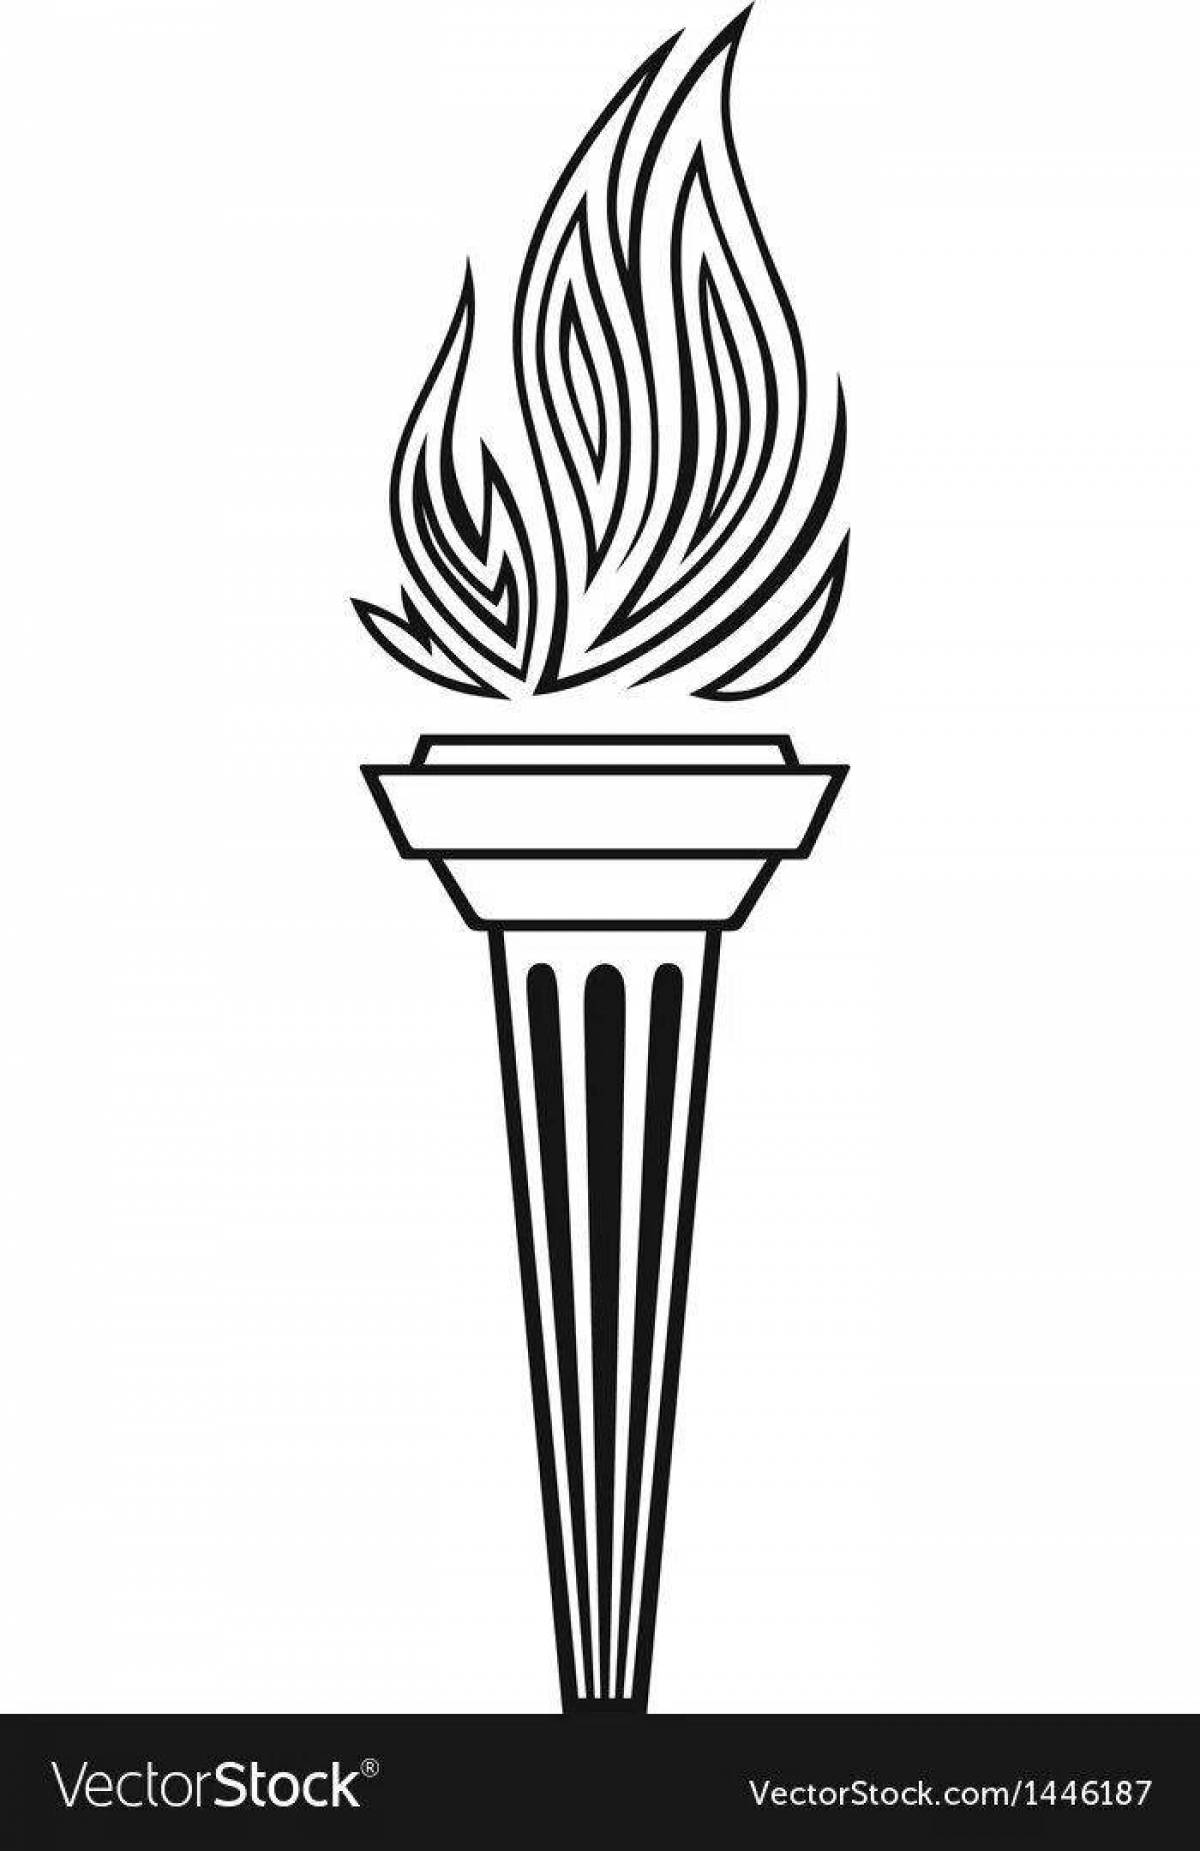 Olympic Incandescent Flame Coloring Page